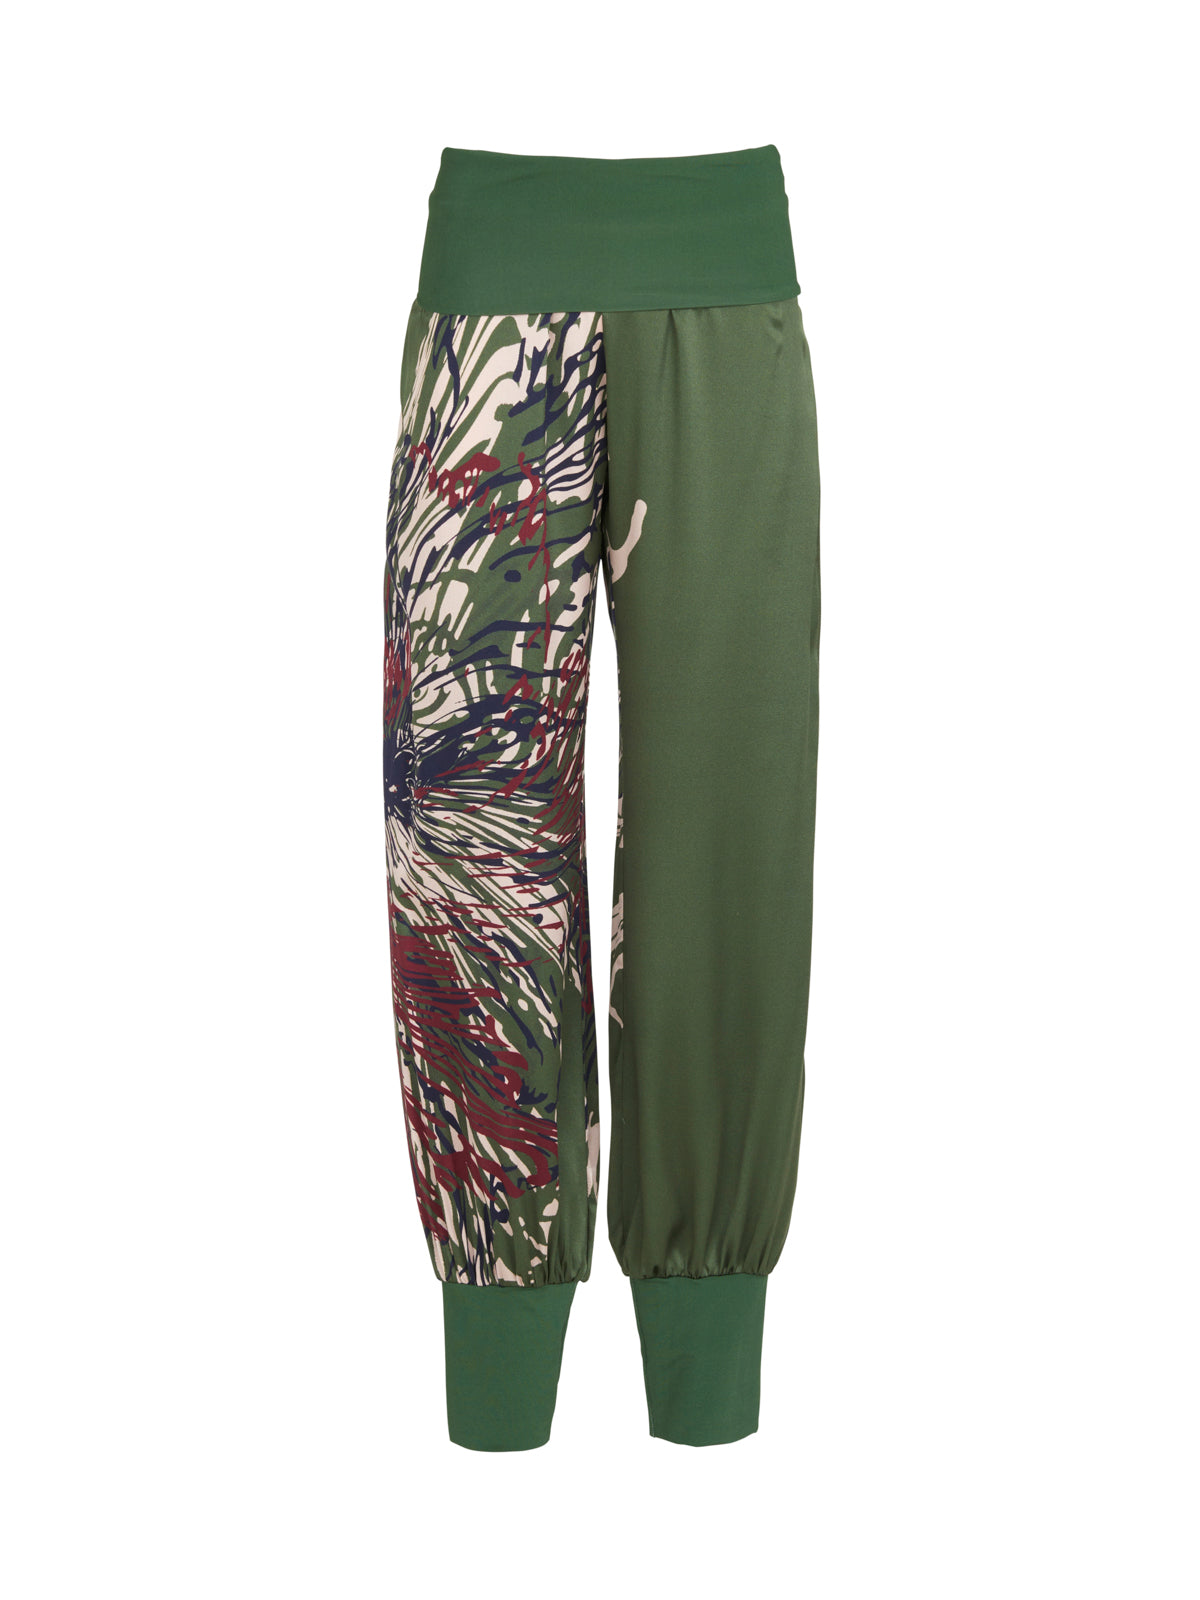 Taboo Pant Green Floral